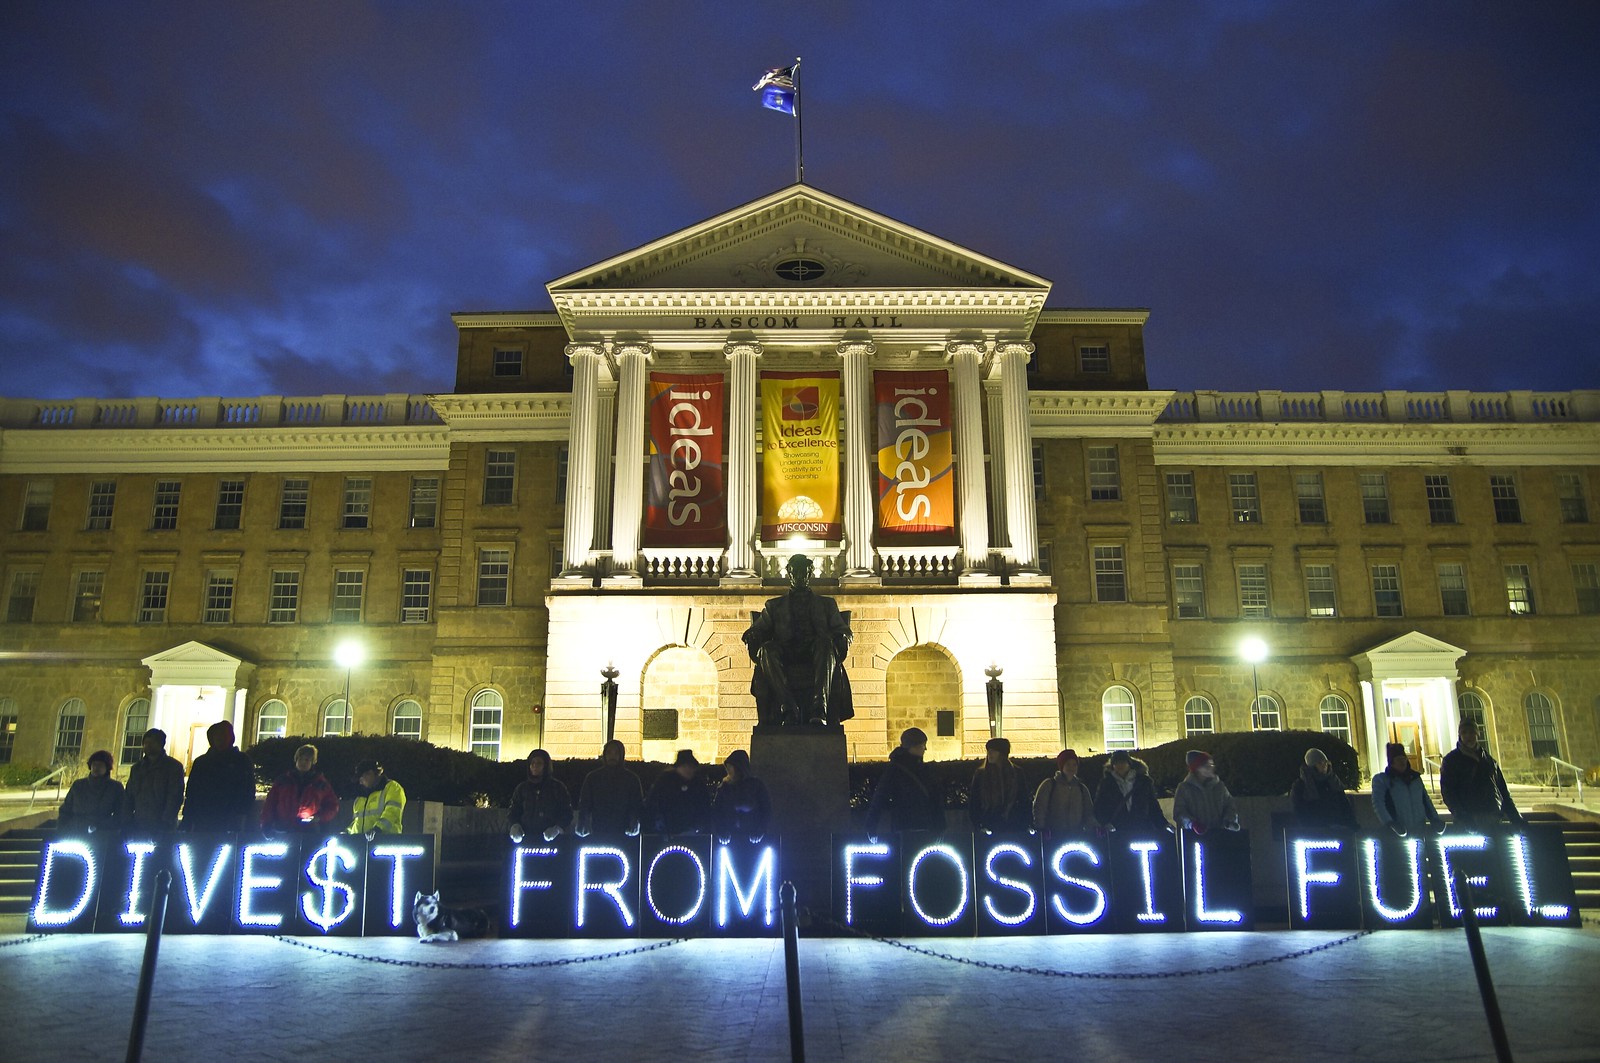 Building lit with divest from fossil fuel sign